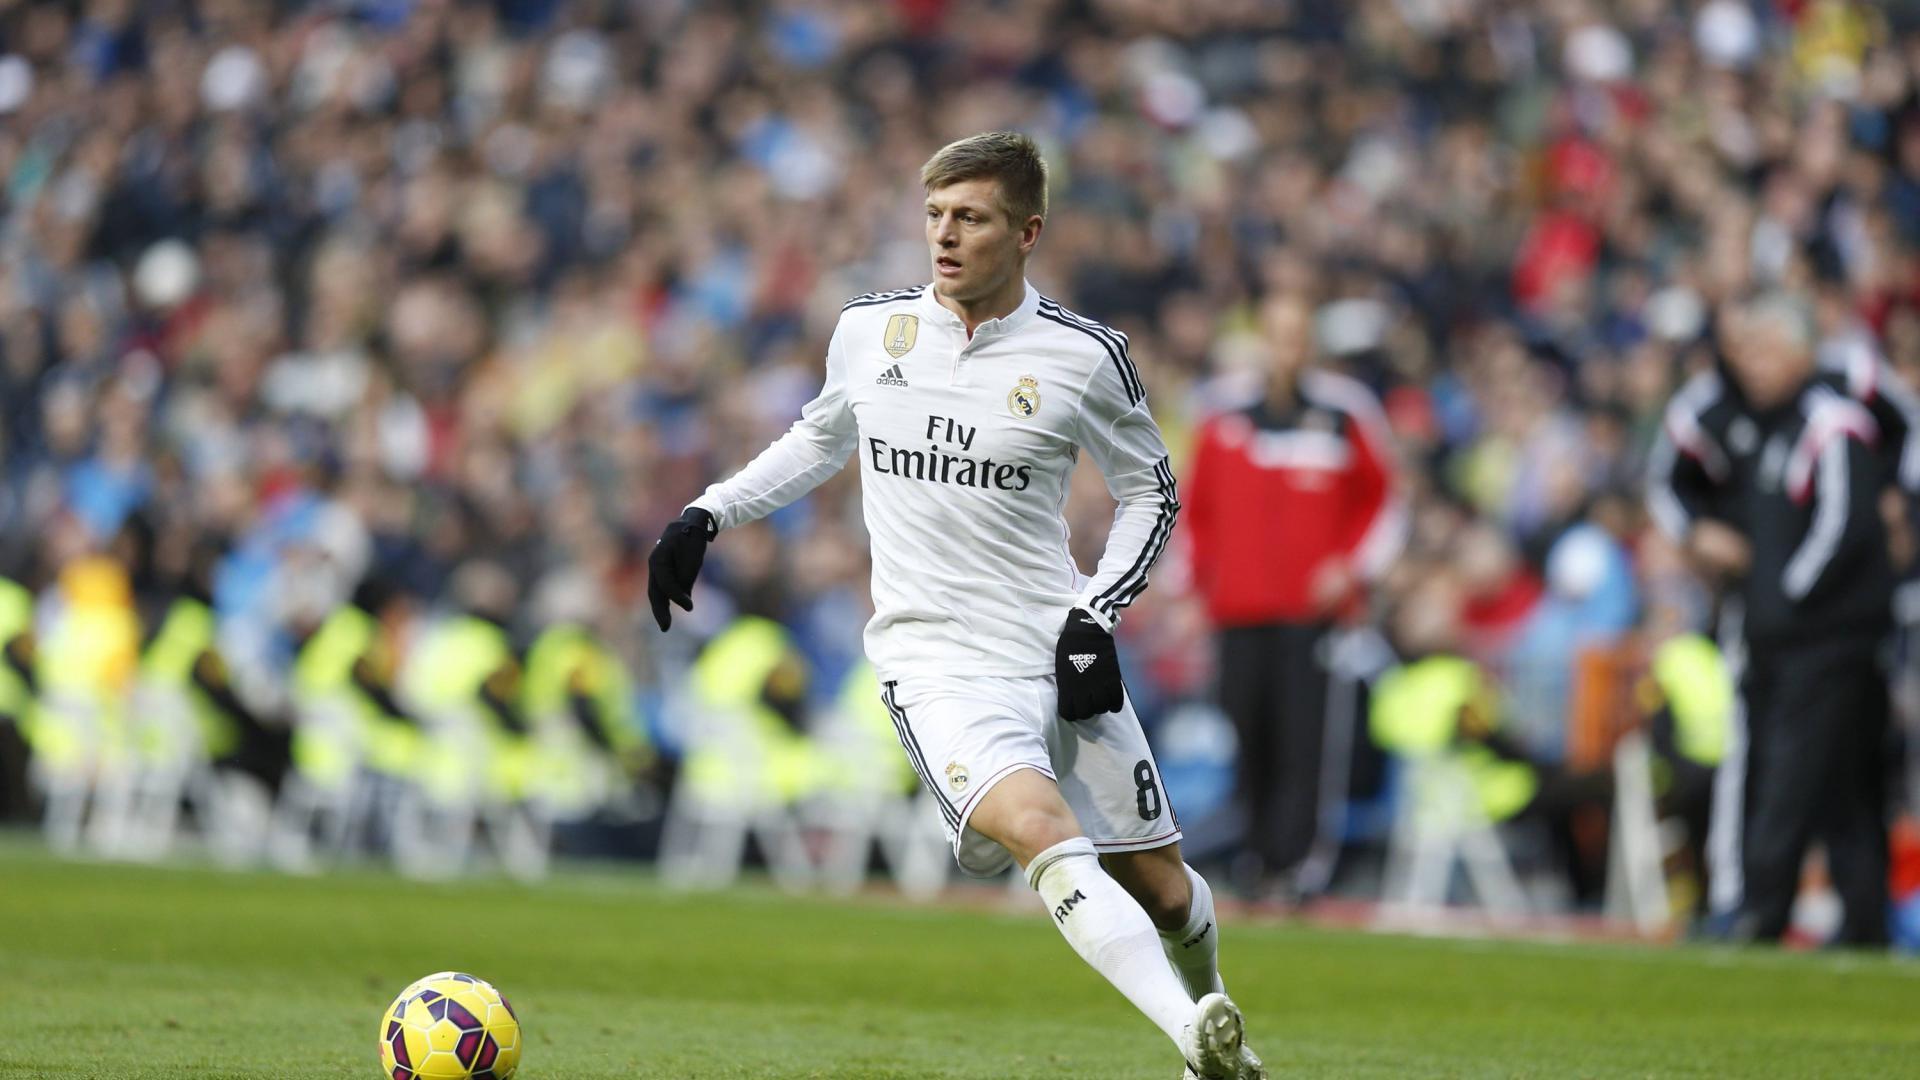 Toni Kroos Wallpaper Image Photo Picture Background